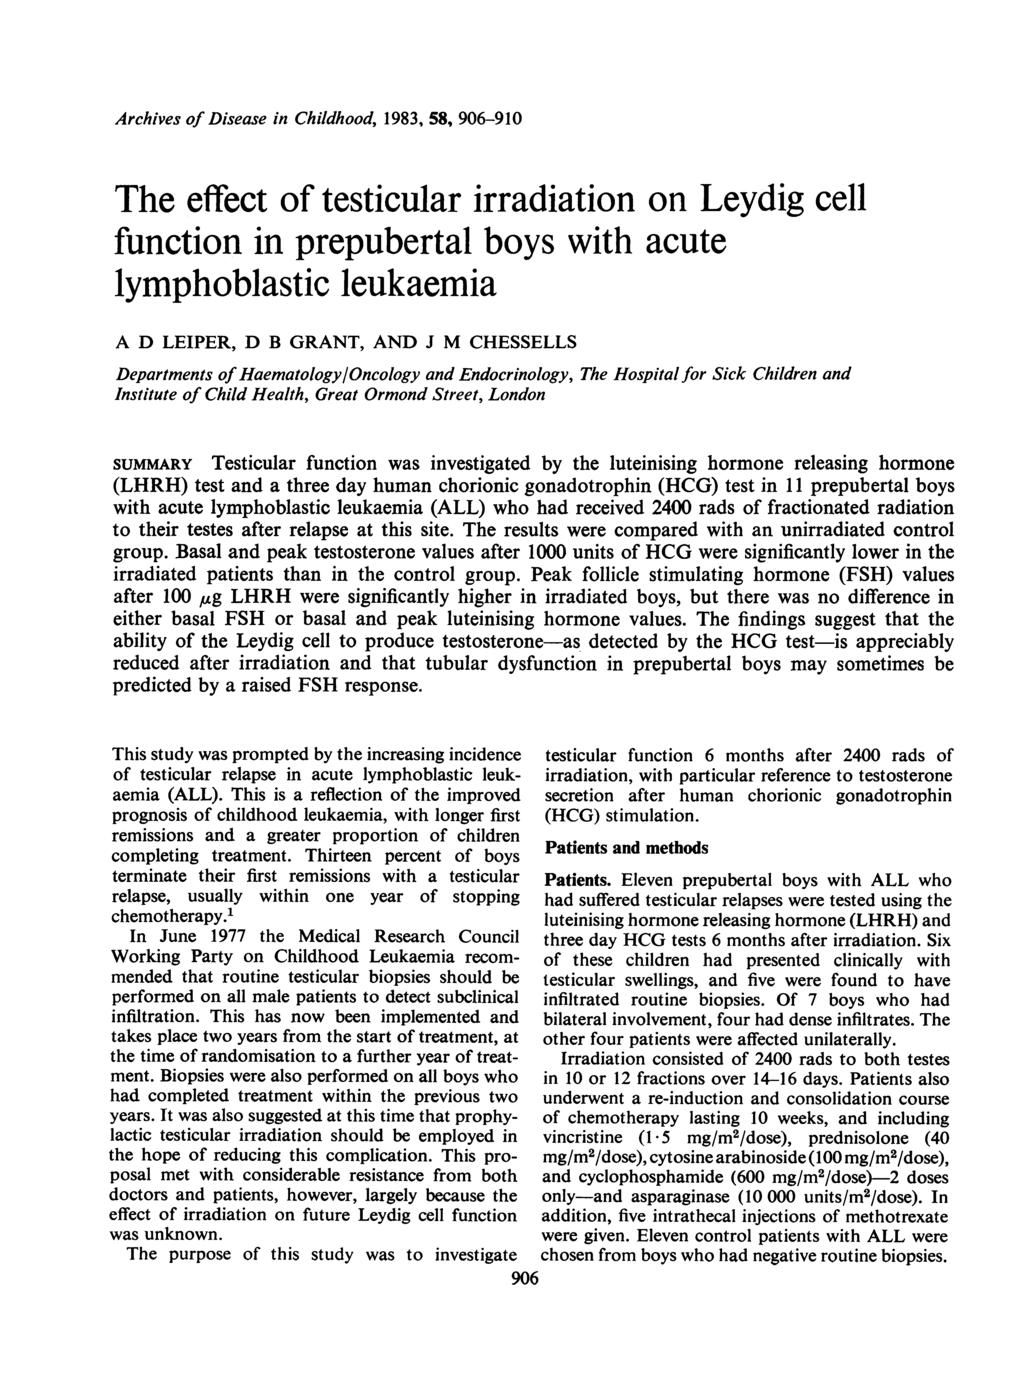 Archives of Disease in Childhood, 1983, 58, 906-910 The effect of testicular irradiation on Leydig cell function in prepubertal boys with acute lymphoblastic leukaemia A D LEIPER, D B GRANT, AND J M